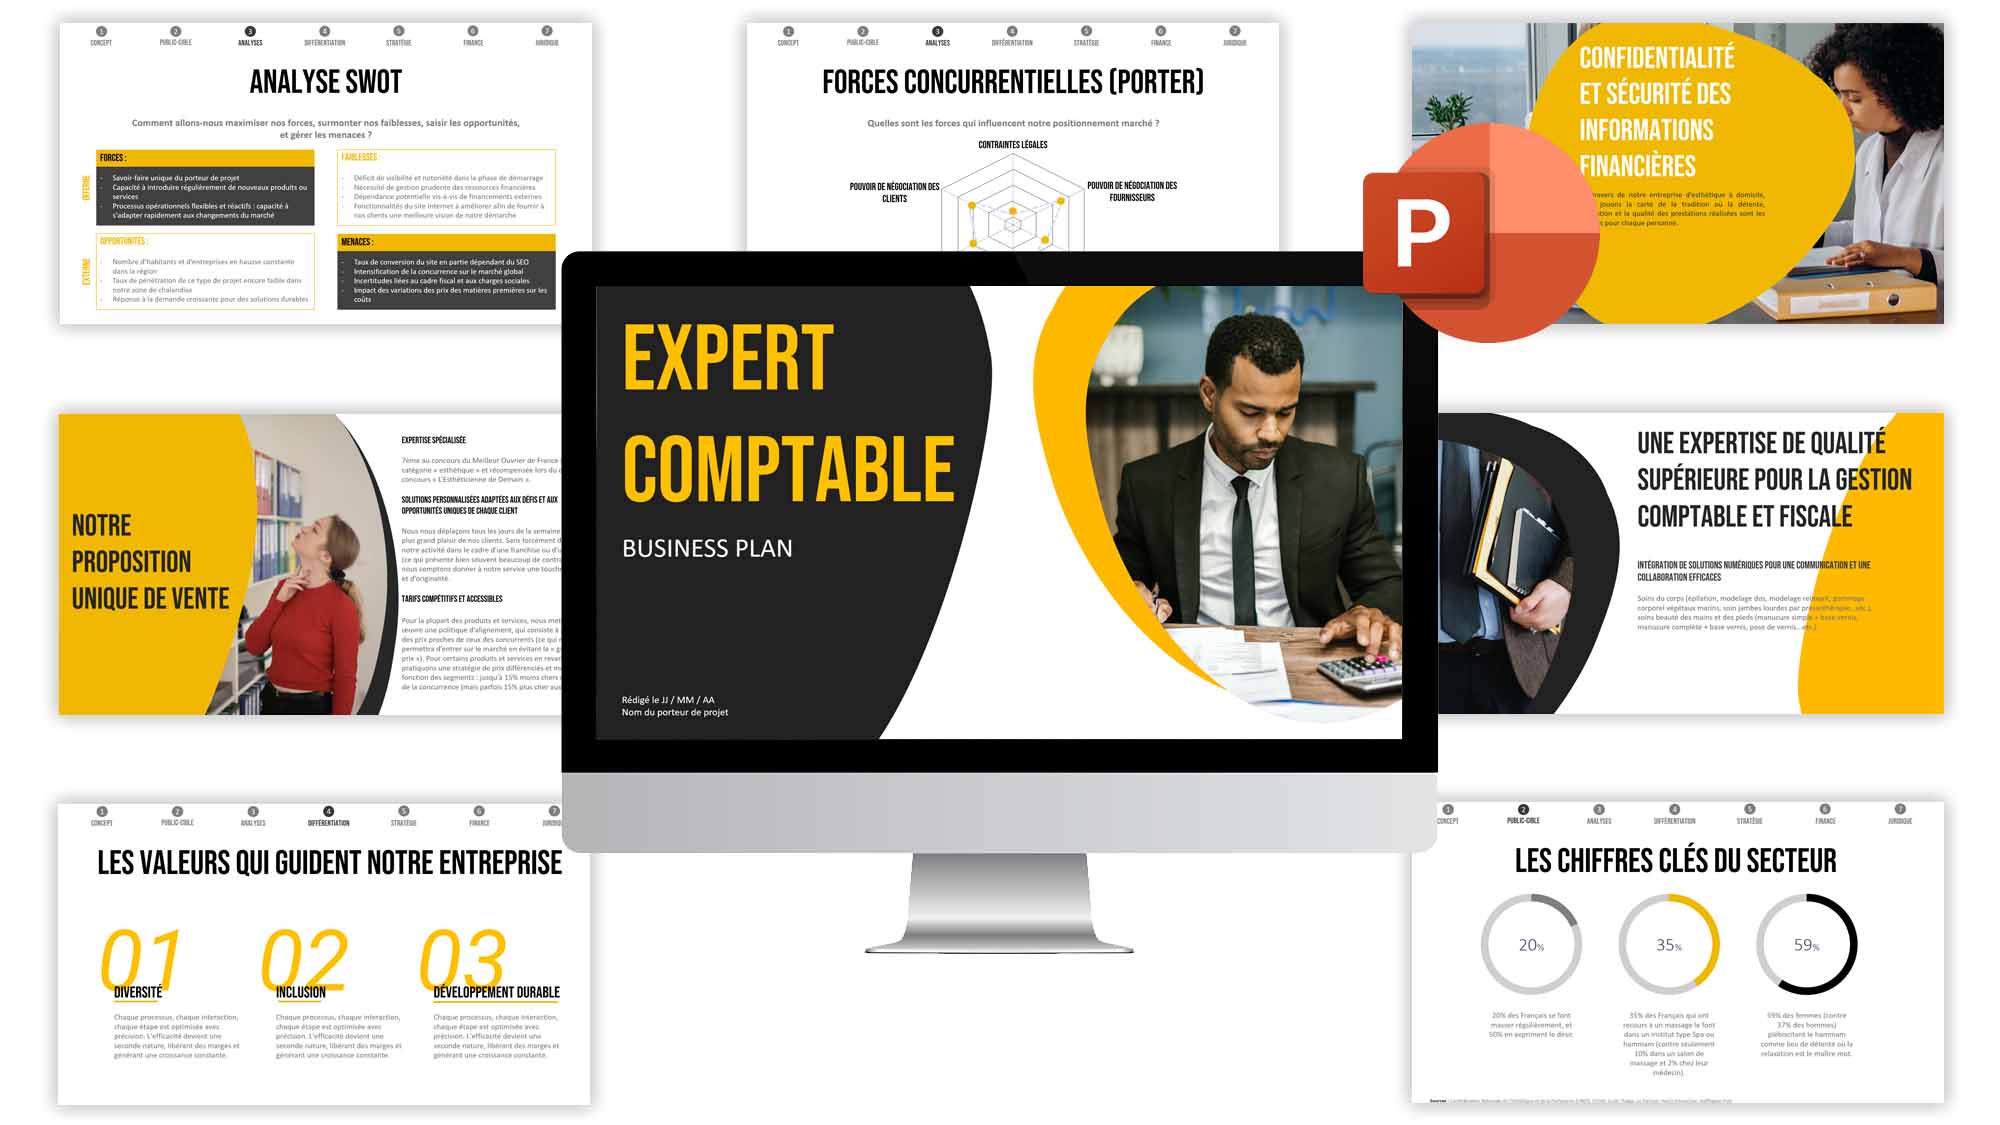 cout business plan expert comptable